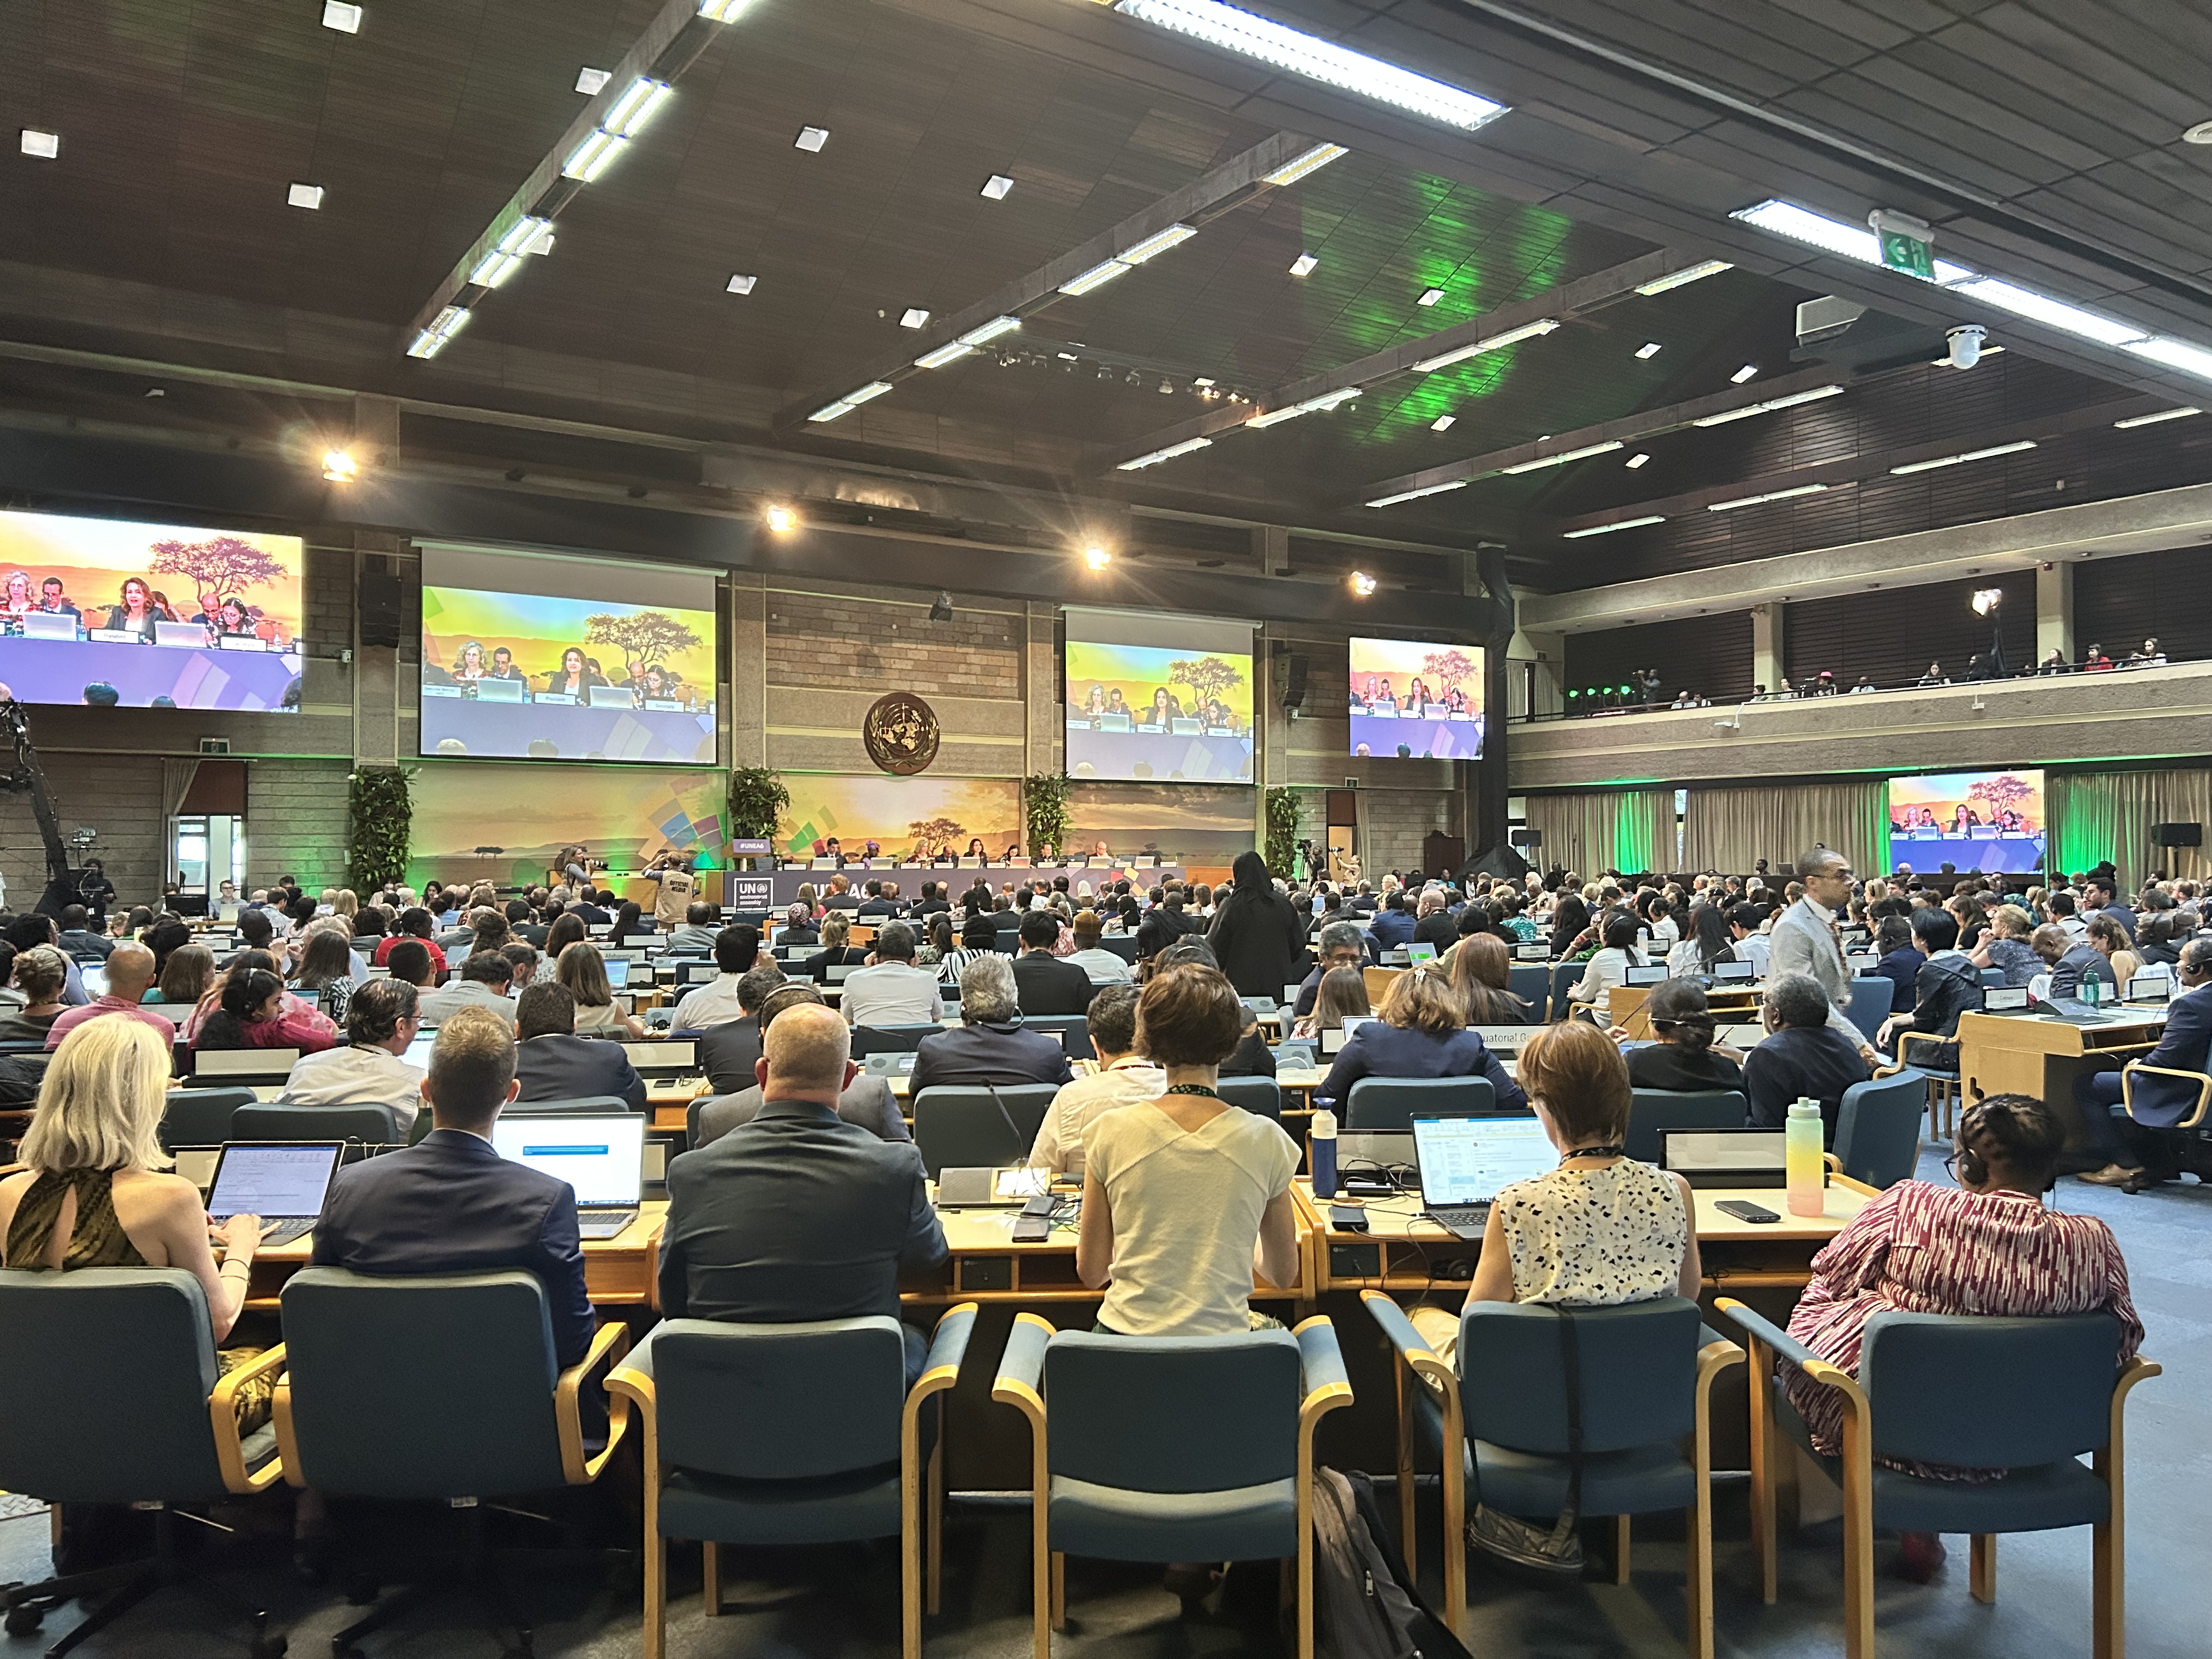 Environmental multilateralism celebrated at UNEA-6